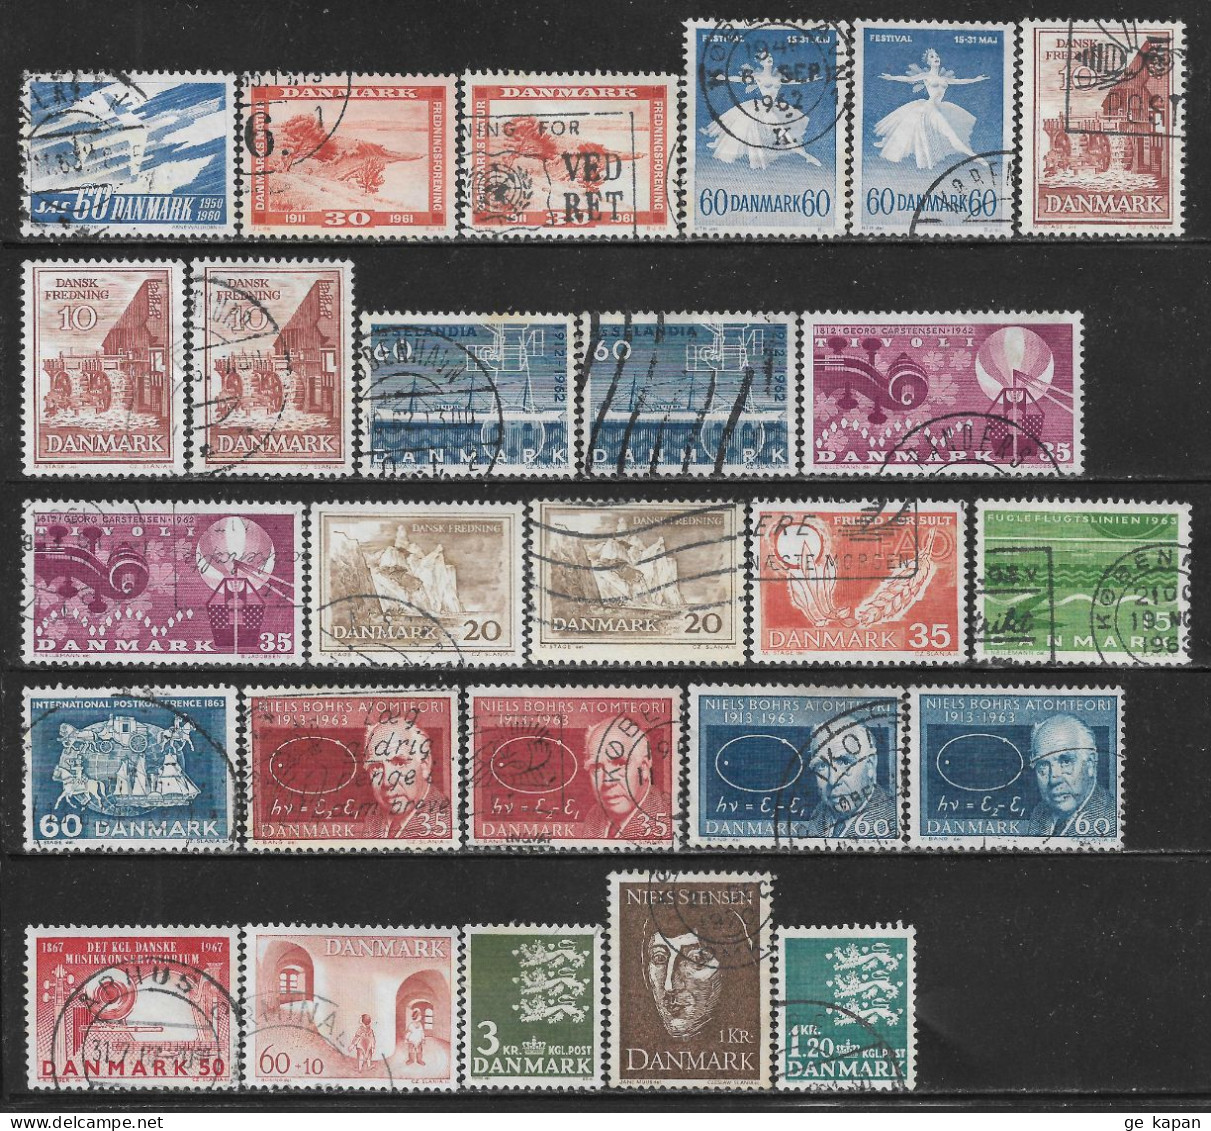 1961-1971 DENMARK Lot Of 26 USED STAMPS (Michel # 388x,389,403,404,406-409,413x,414x,417,418,449,469,483,485,513) €9.10 - Usati